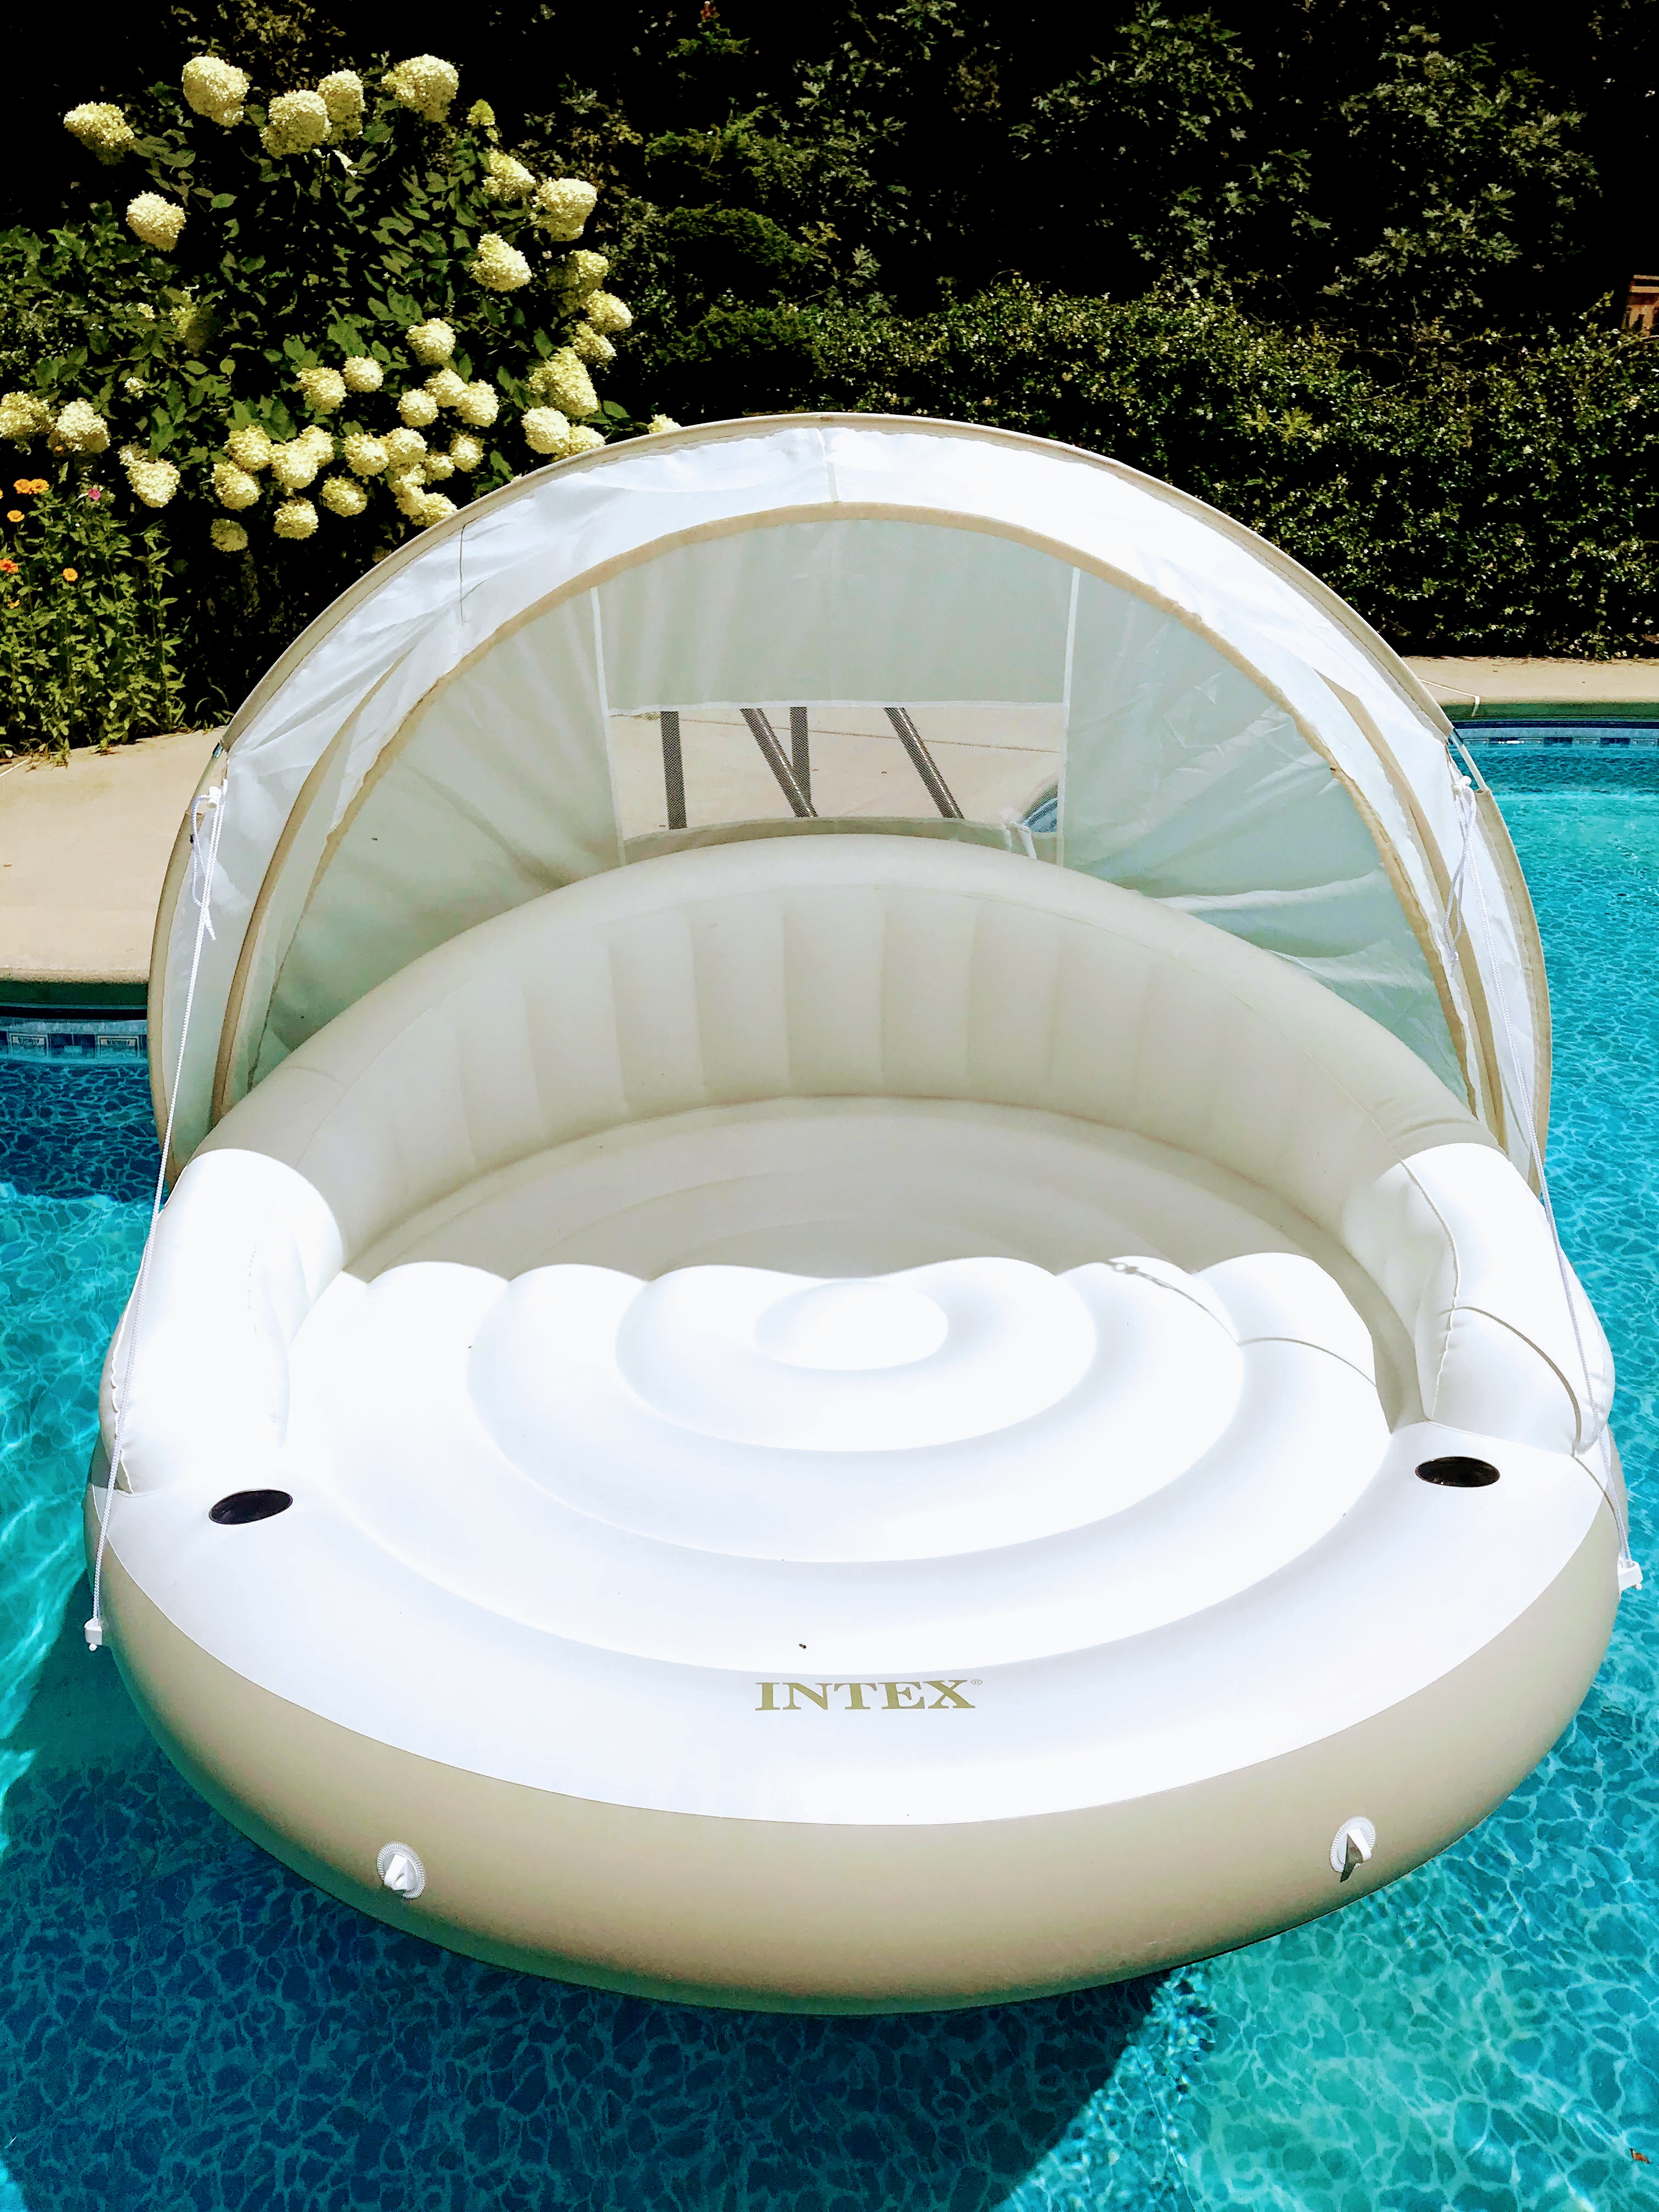 Cool Pool Floats for Adults = Fun and Relaxation